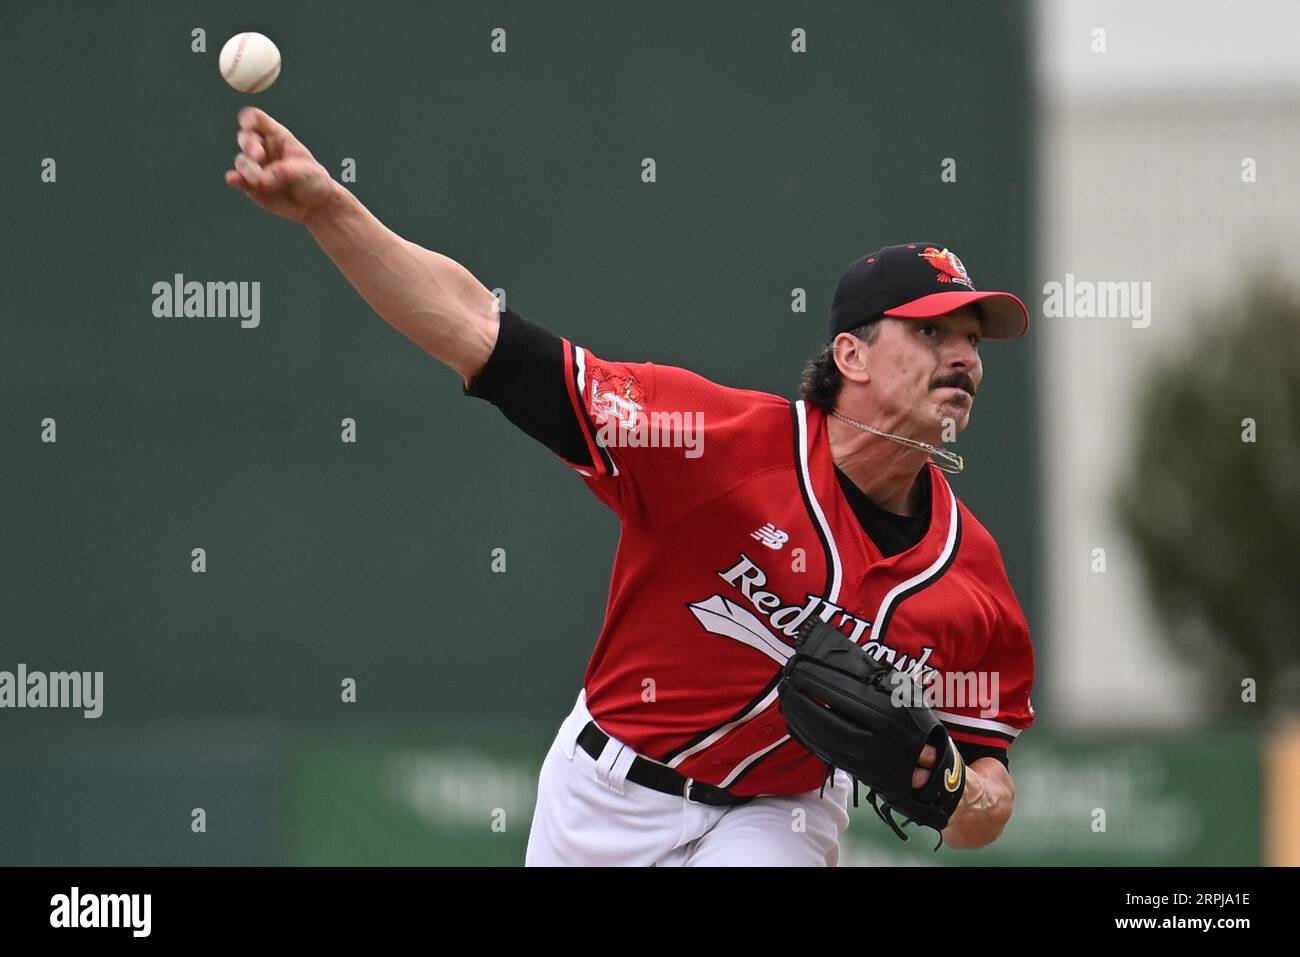 FM RedHawks pitcher Garrett Alexander (31) delivers a pitch during the FM Redhawks game against the Winnipeg Goldeyes in American Association professional baseball at Newman Outdoor Field in Fargo, ND on Sunday, September 4, 2023. Winnipeg won 7-2. Photo by Russell Hons/CSM. Stock Photo